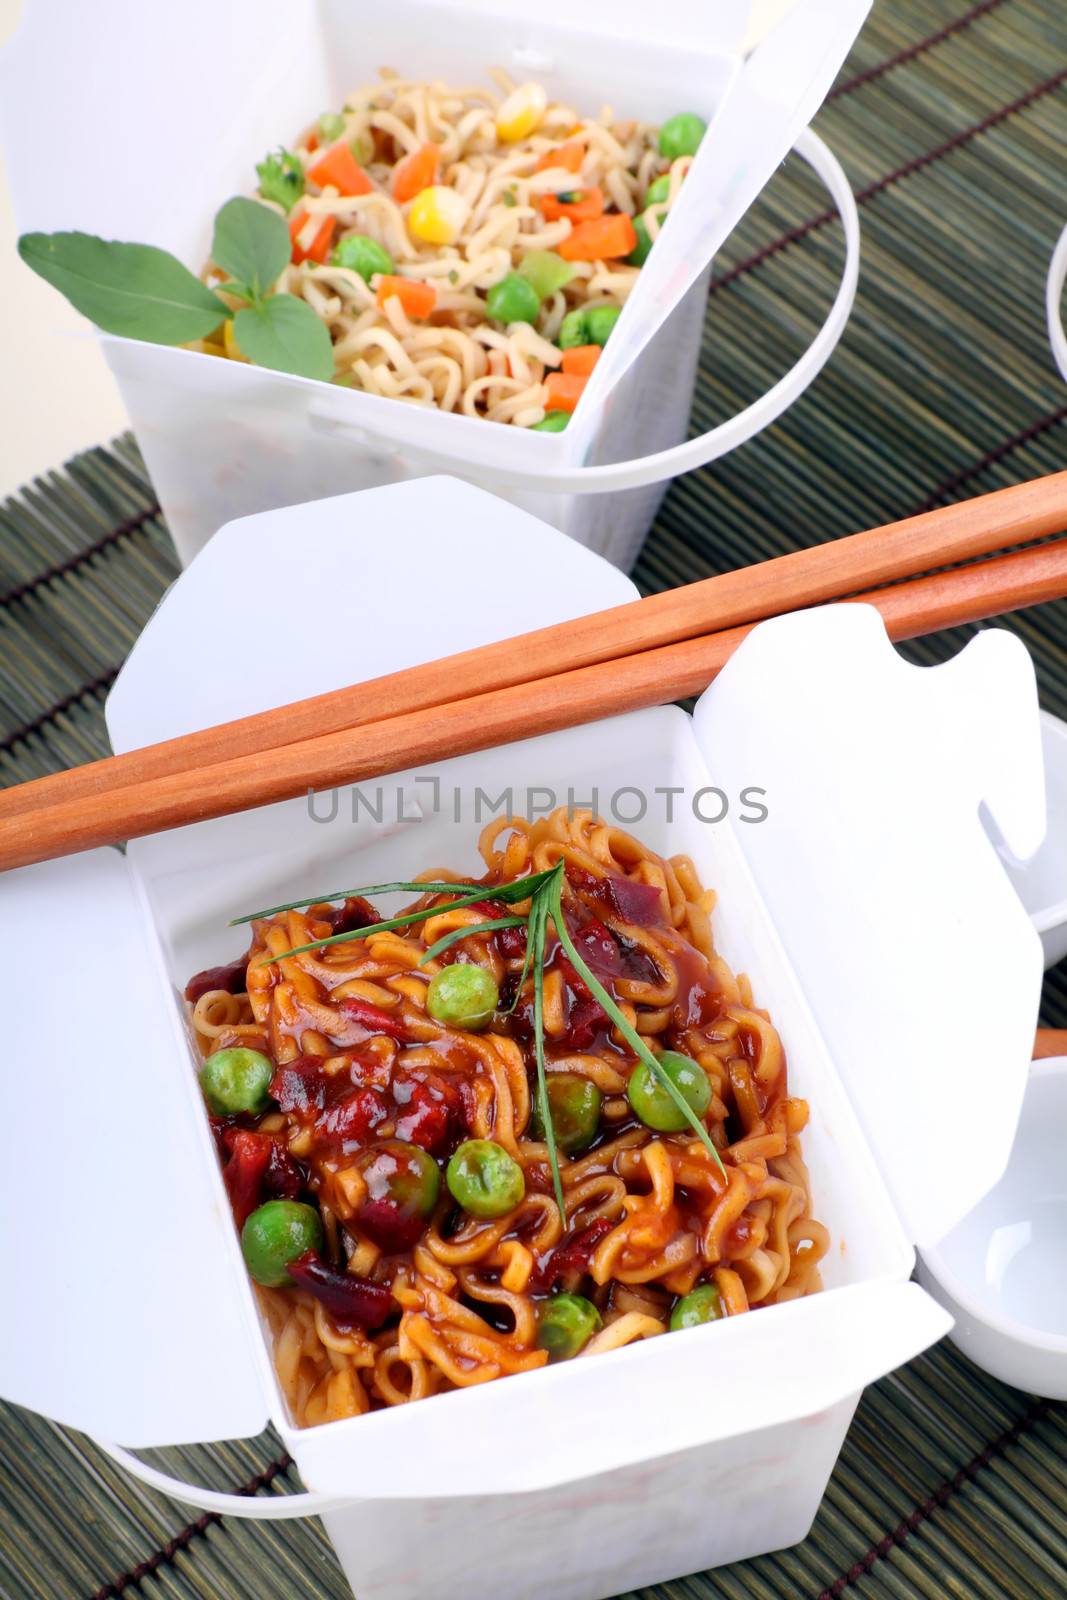 BBQ egg noodles and vegetable noodles in take away containers.